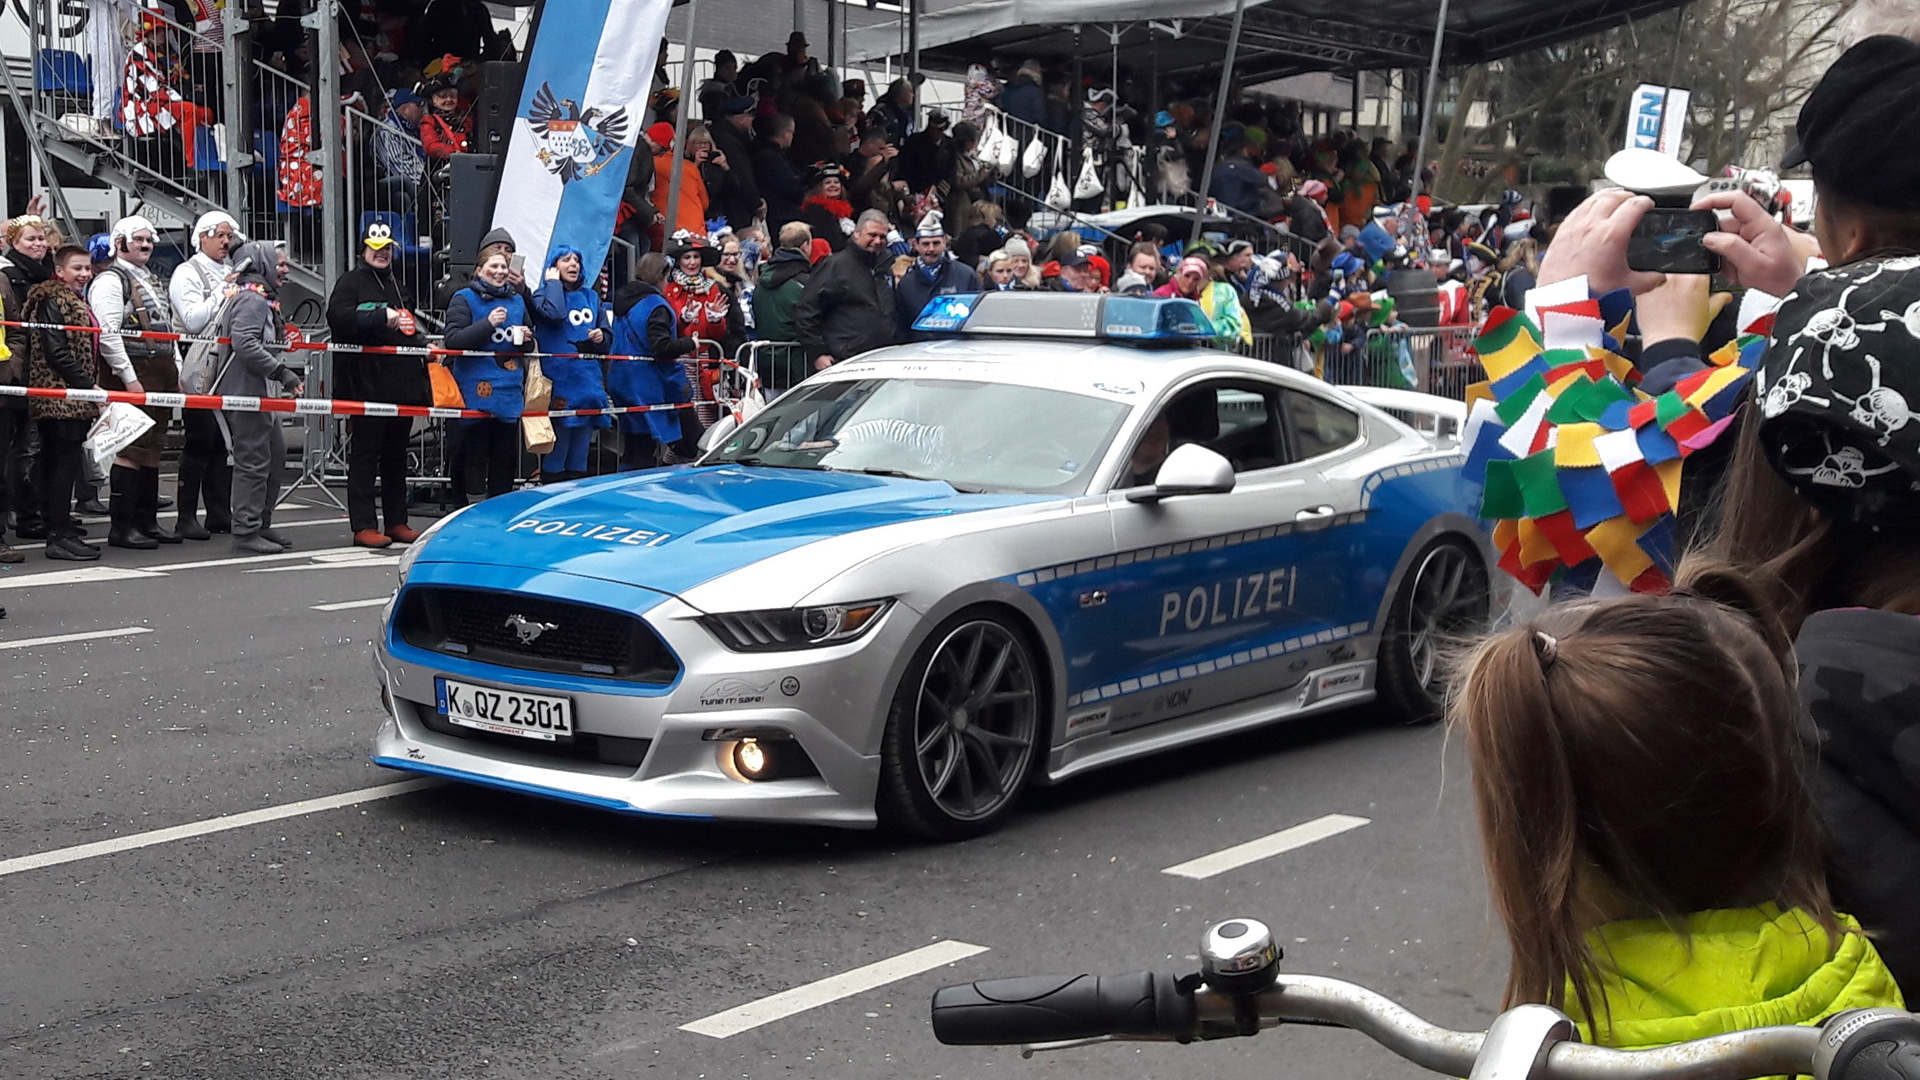 Tune it! Safe! 2017 Ford Mustang GT police car at 2017 Cologne Carnival parade